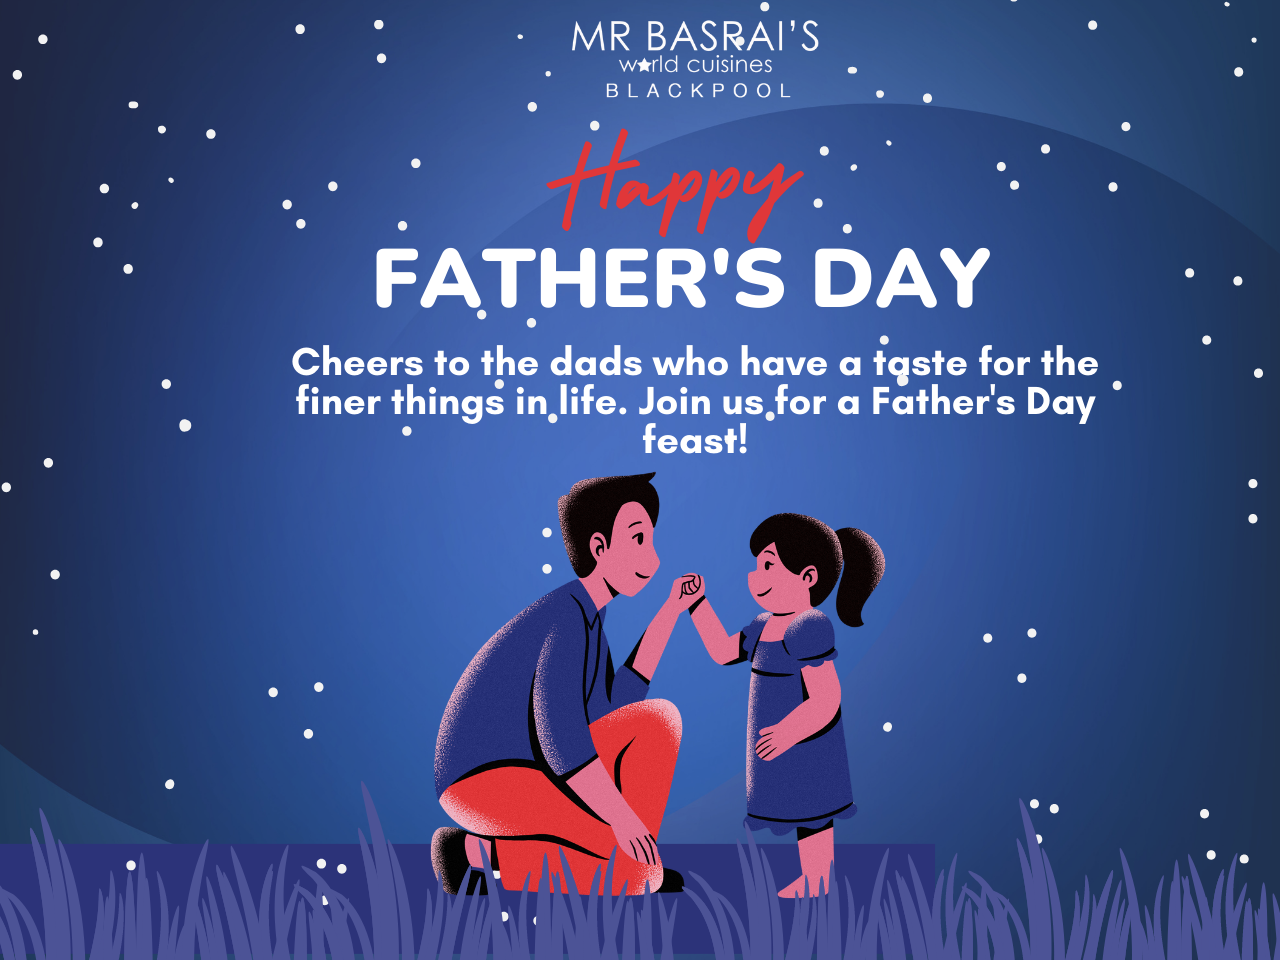 Dads bring flavor to our lives, so let us treat them to a delicious meal this Father’s Day!